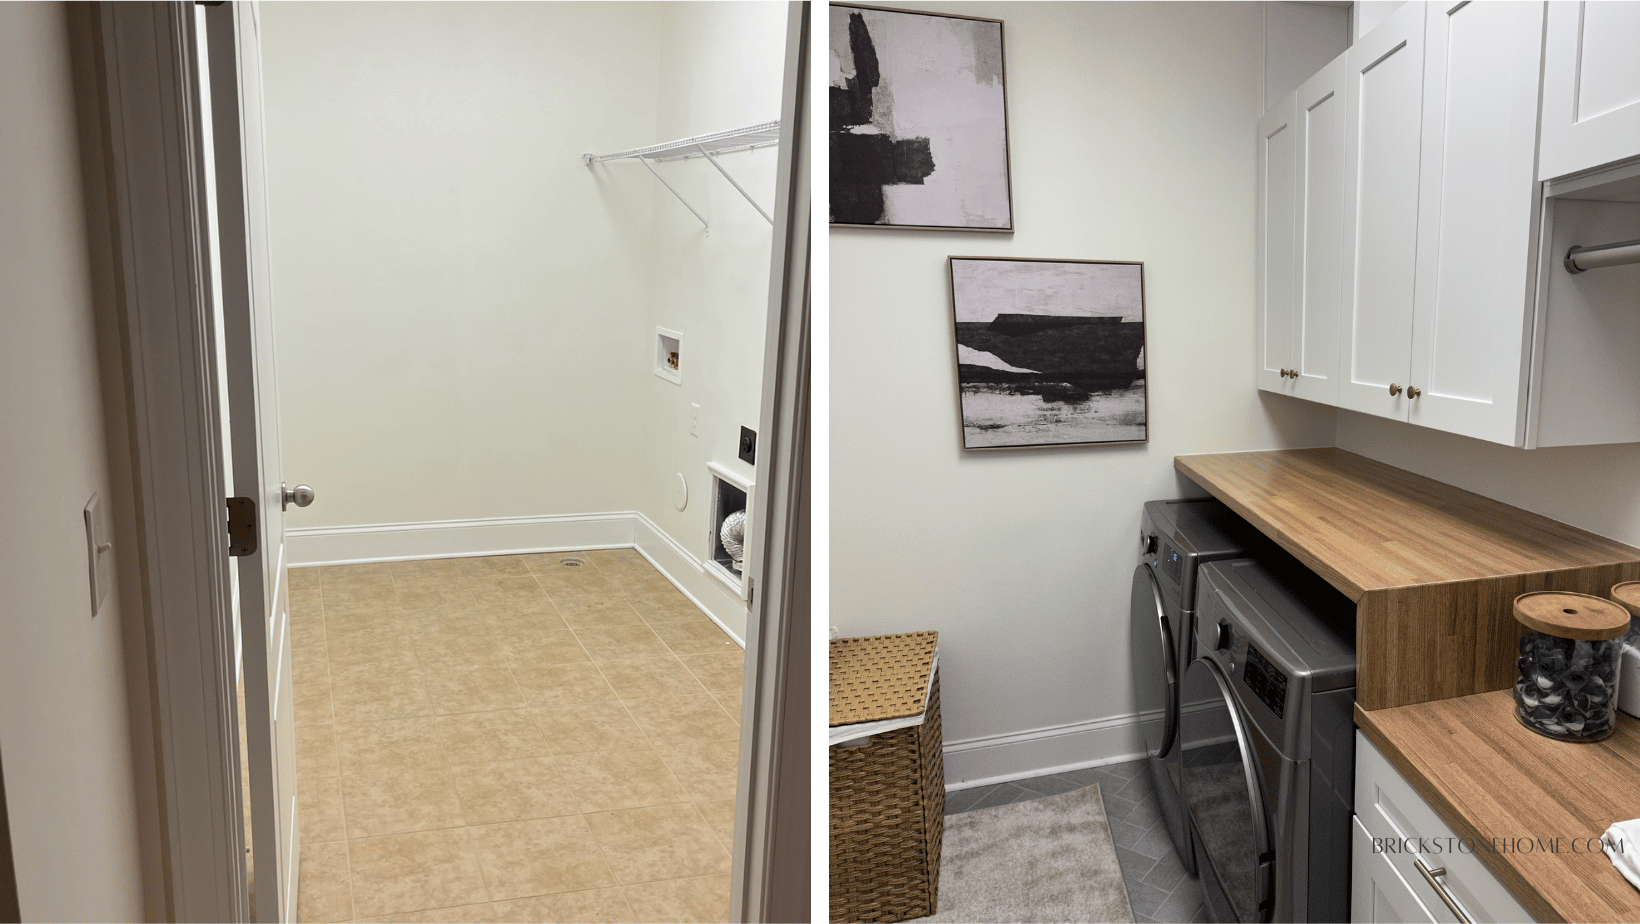 Laundry Room Renovation Cost Before and After